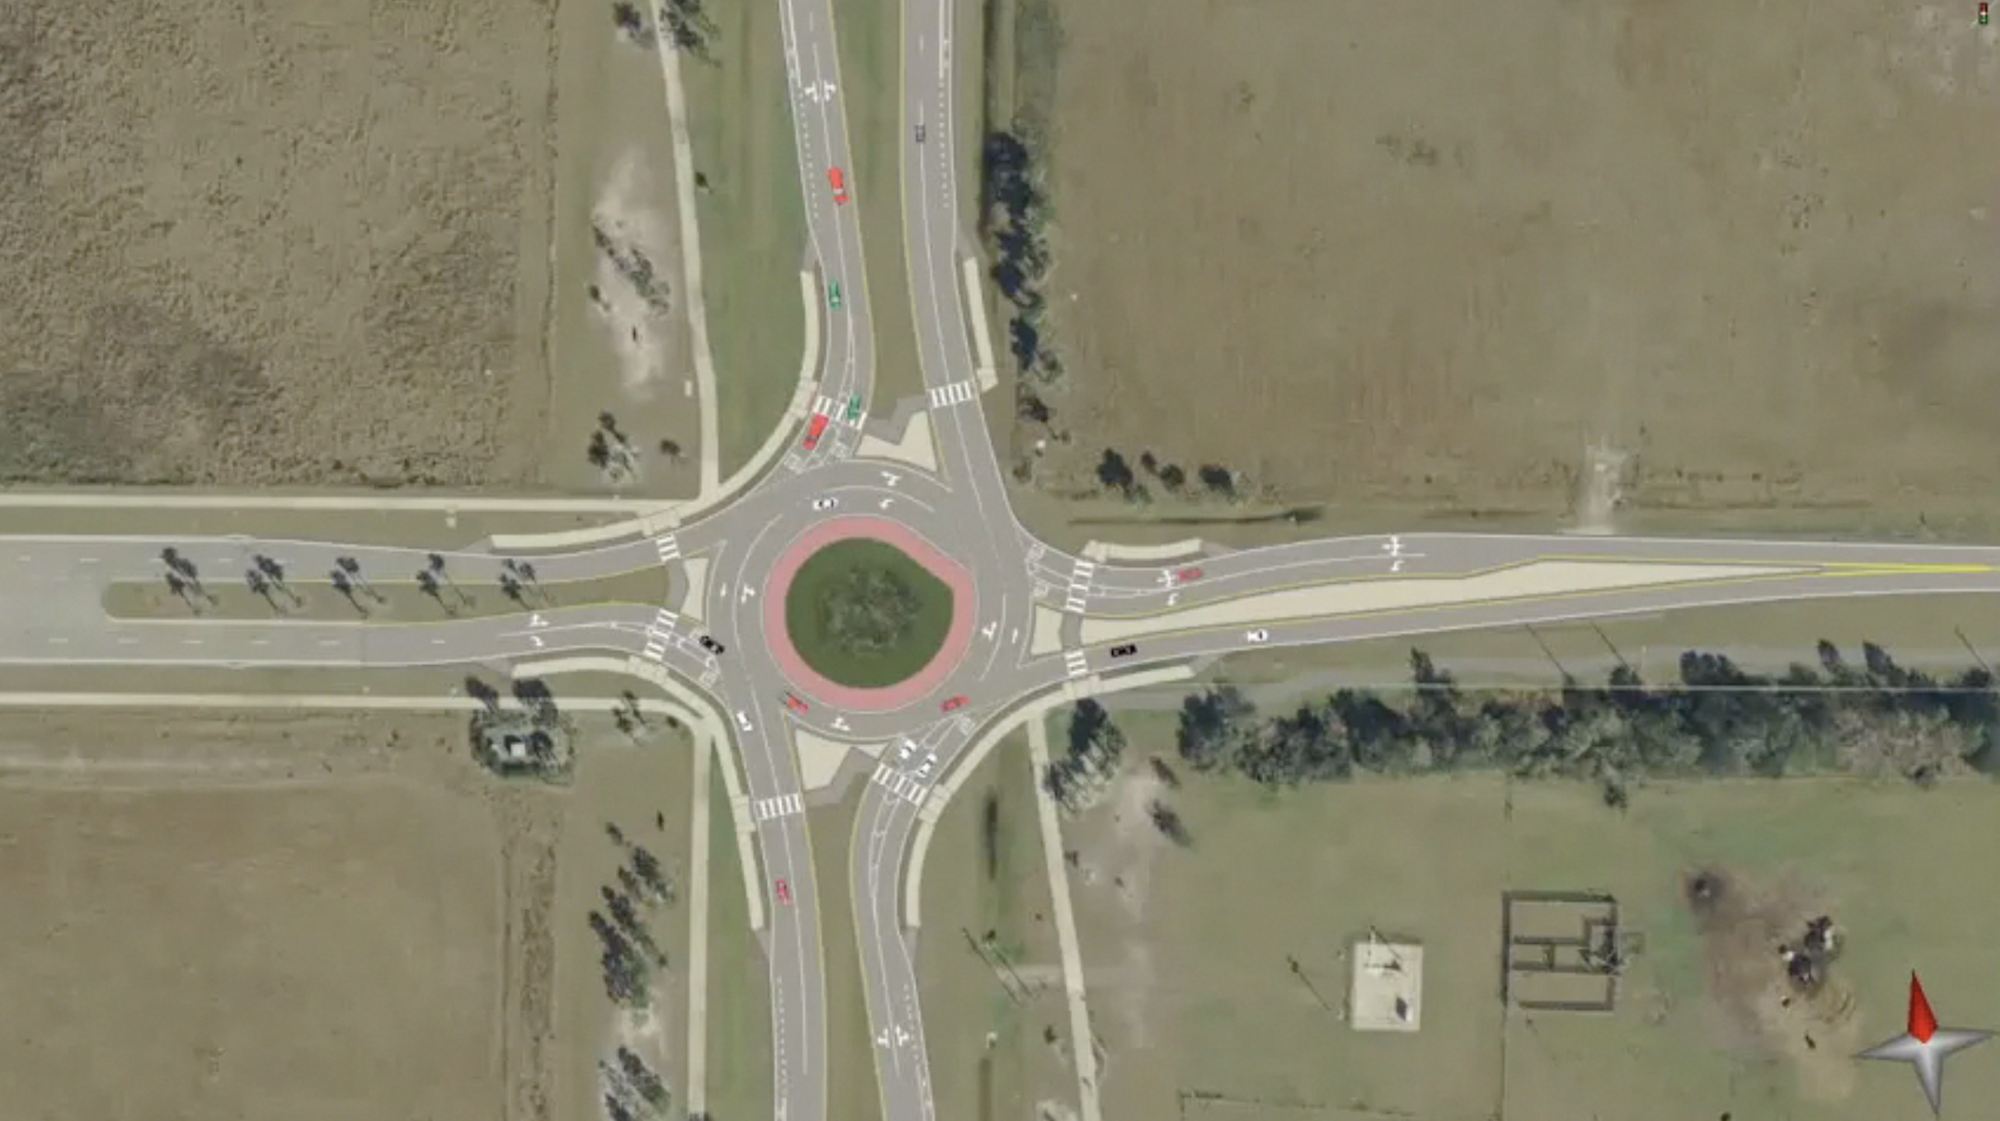 A rendering of the proposed roundabout, shown in an FDOT presentation. (Image courtesy of the FDOT)